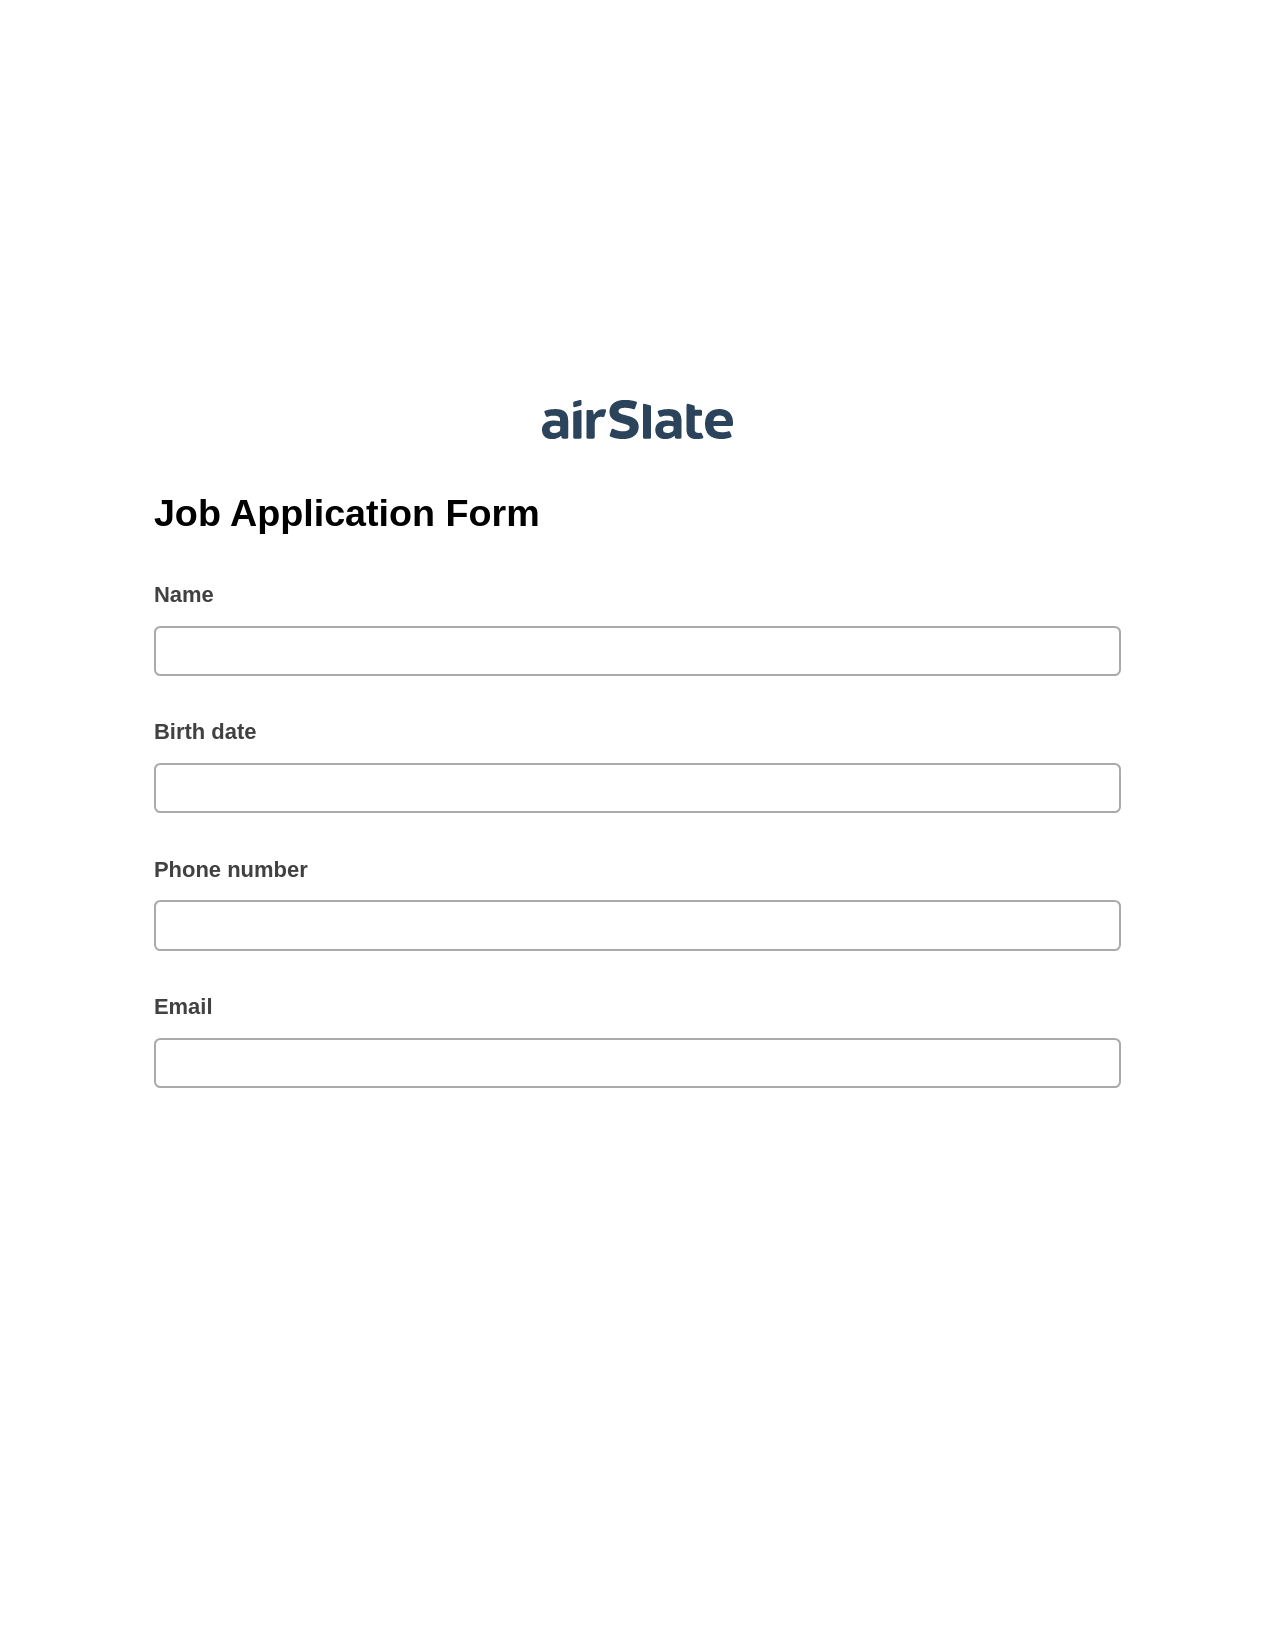 Multirole Job Application Form Pre-fill from another Slate Bot, Audit Trail Bot, Google Drive Bot